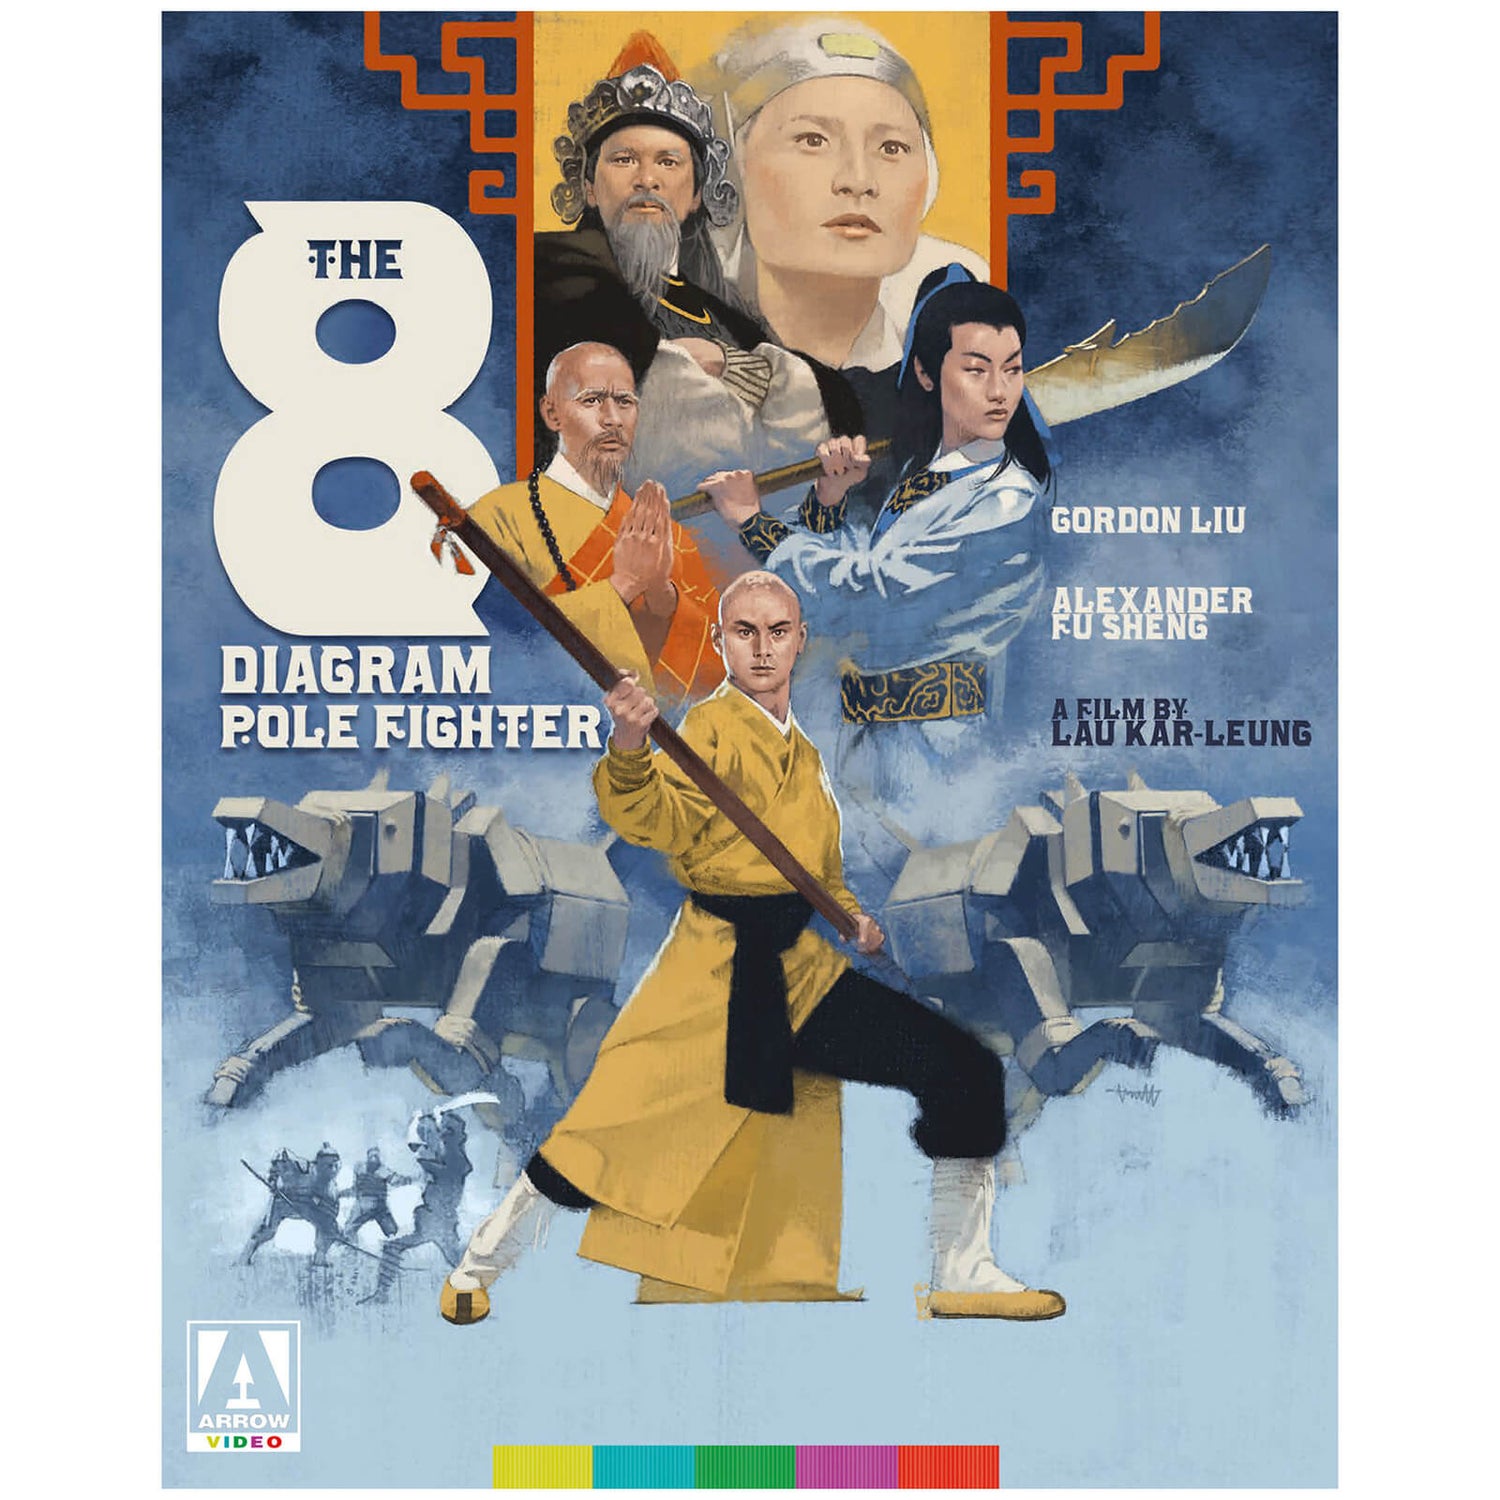 The 8 Diagram Pole Fighter Blu-ray